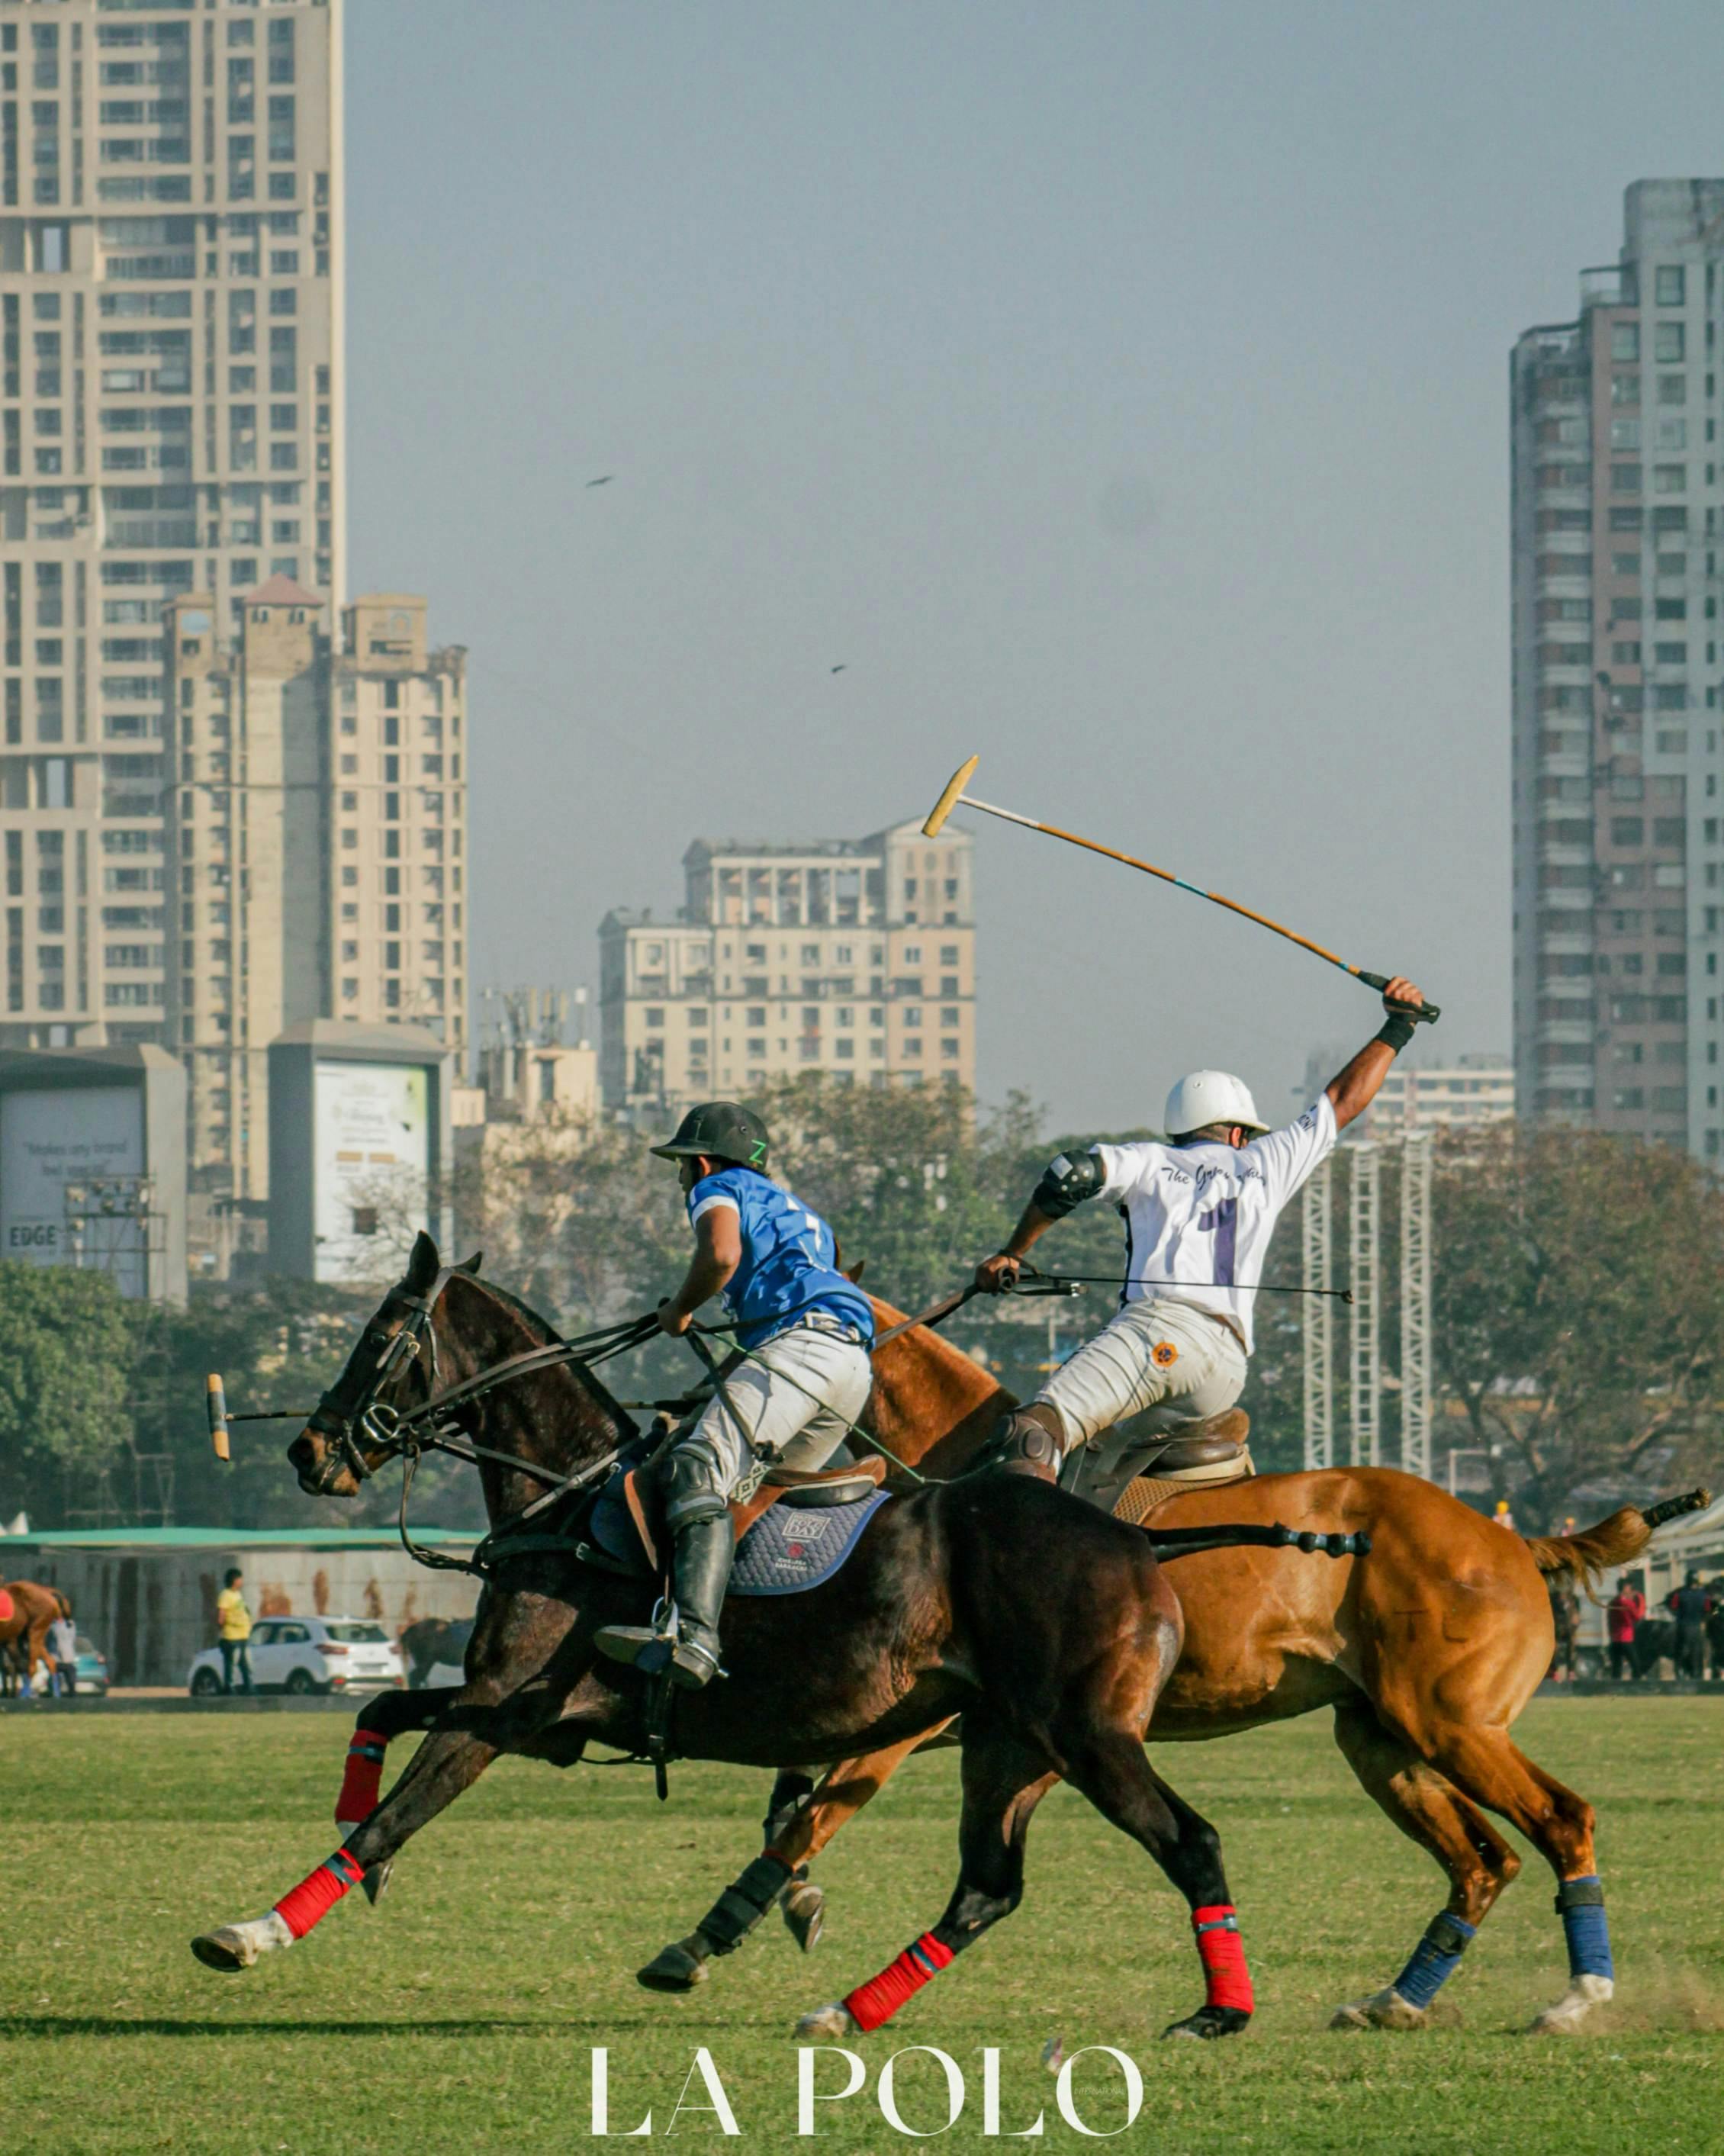 The way polo players anticipate their opponents' moves and react accordingly is a testament to their skill.